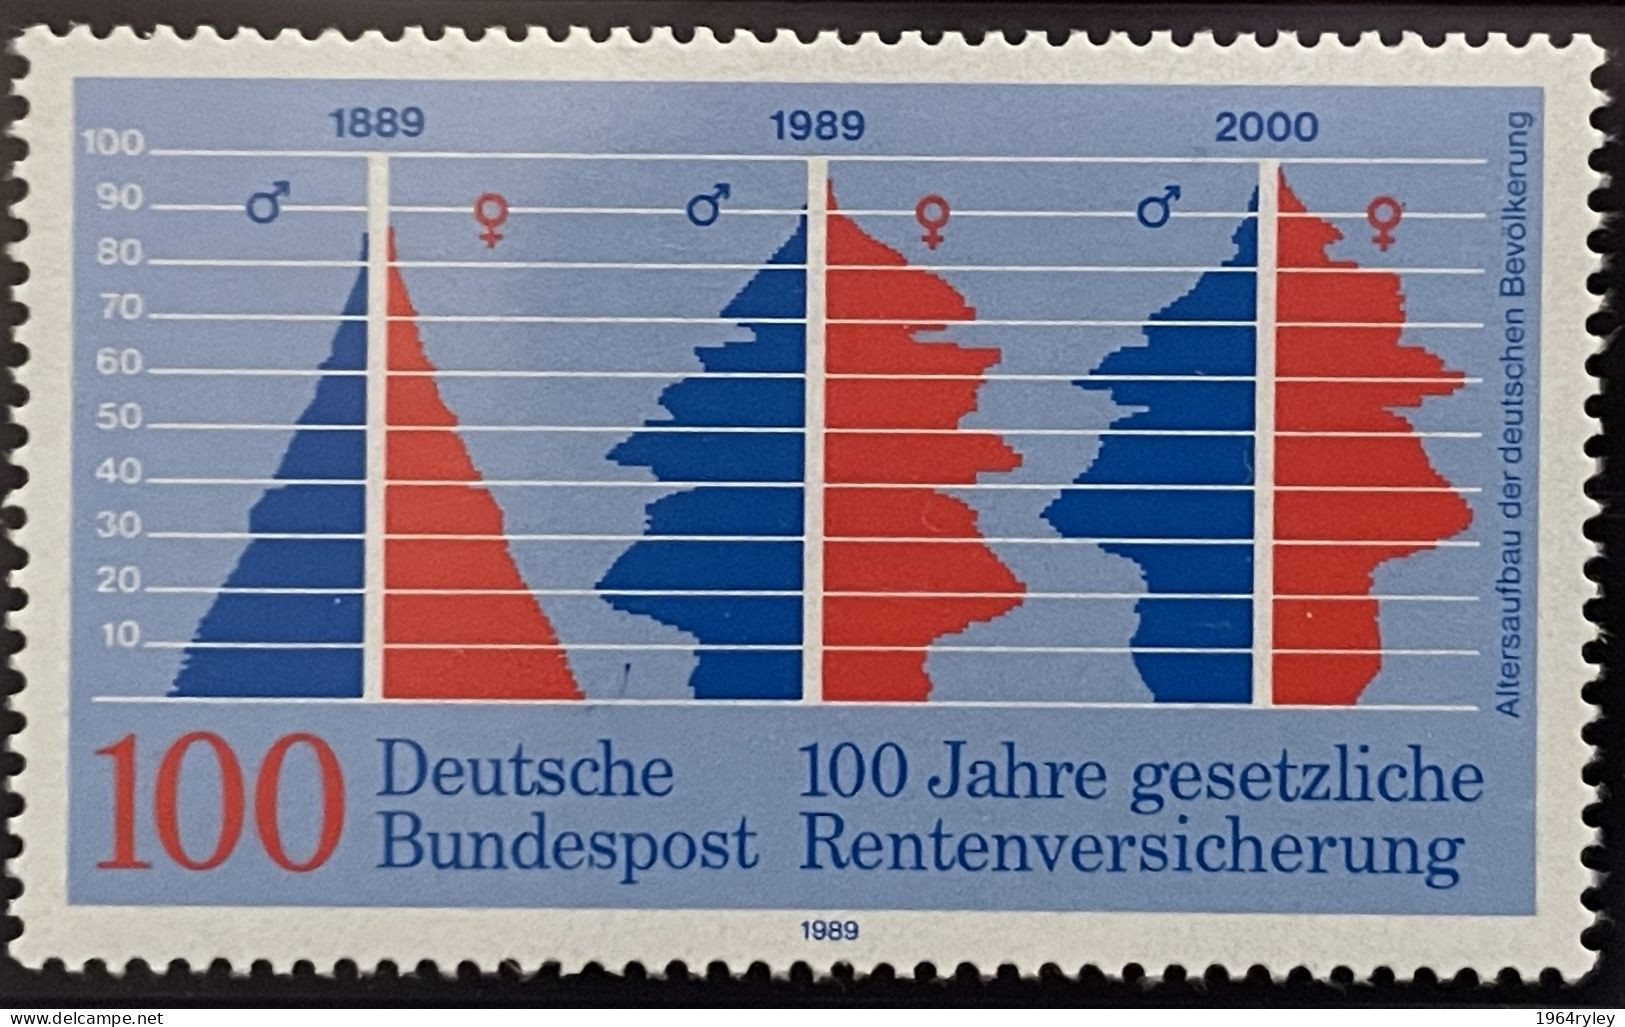 GERMANY - MNH** - 1989 - # 1426 - Unused Stamps